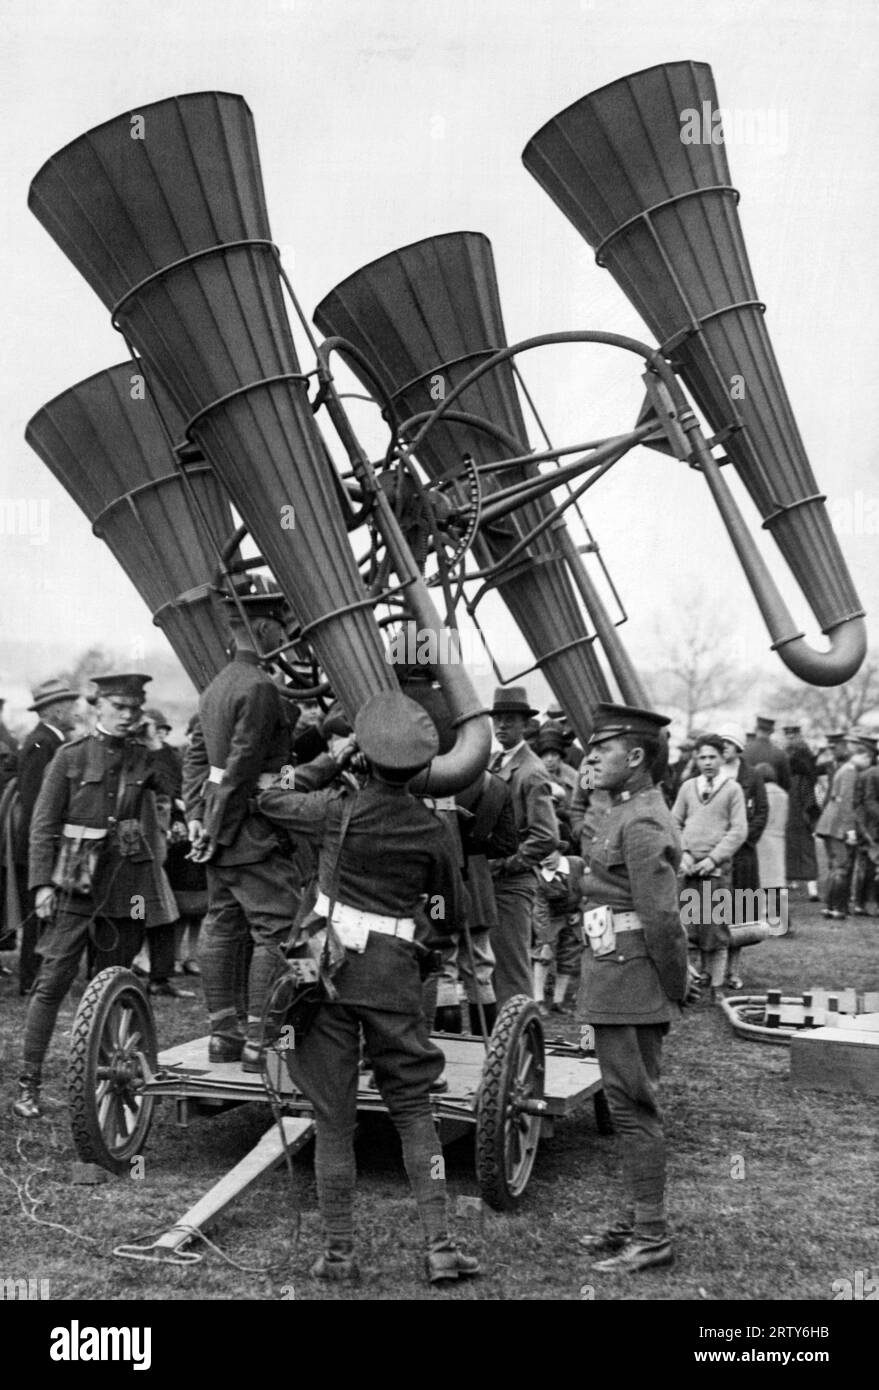 United States   April 2, 1925 Troops inspecting a newly-developed acoustic locator device, mounted on a wheeled platform. The large horns amplify the distant sounds of approaching enemy aircraft, enabling the aircraft defenders to derive their distance and altitude. Stock Photo